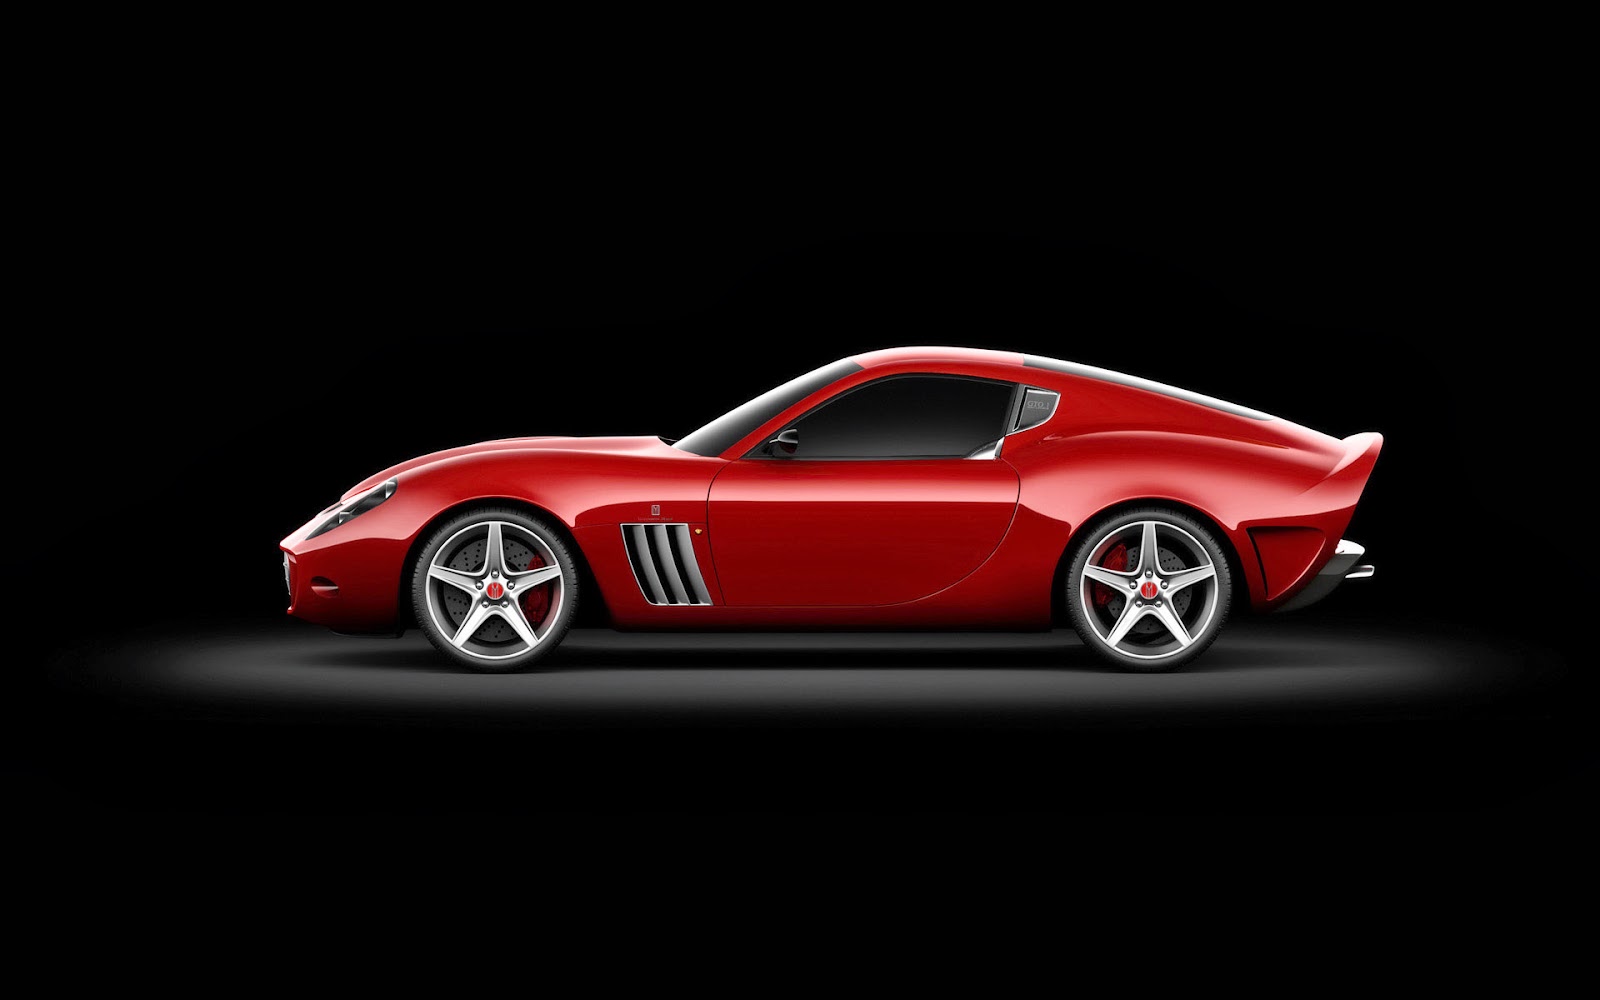 Lovable Images: Ferrari Car HD Pictures Free Download ...